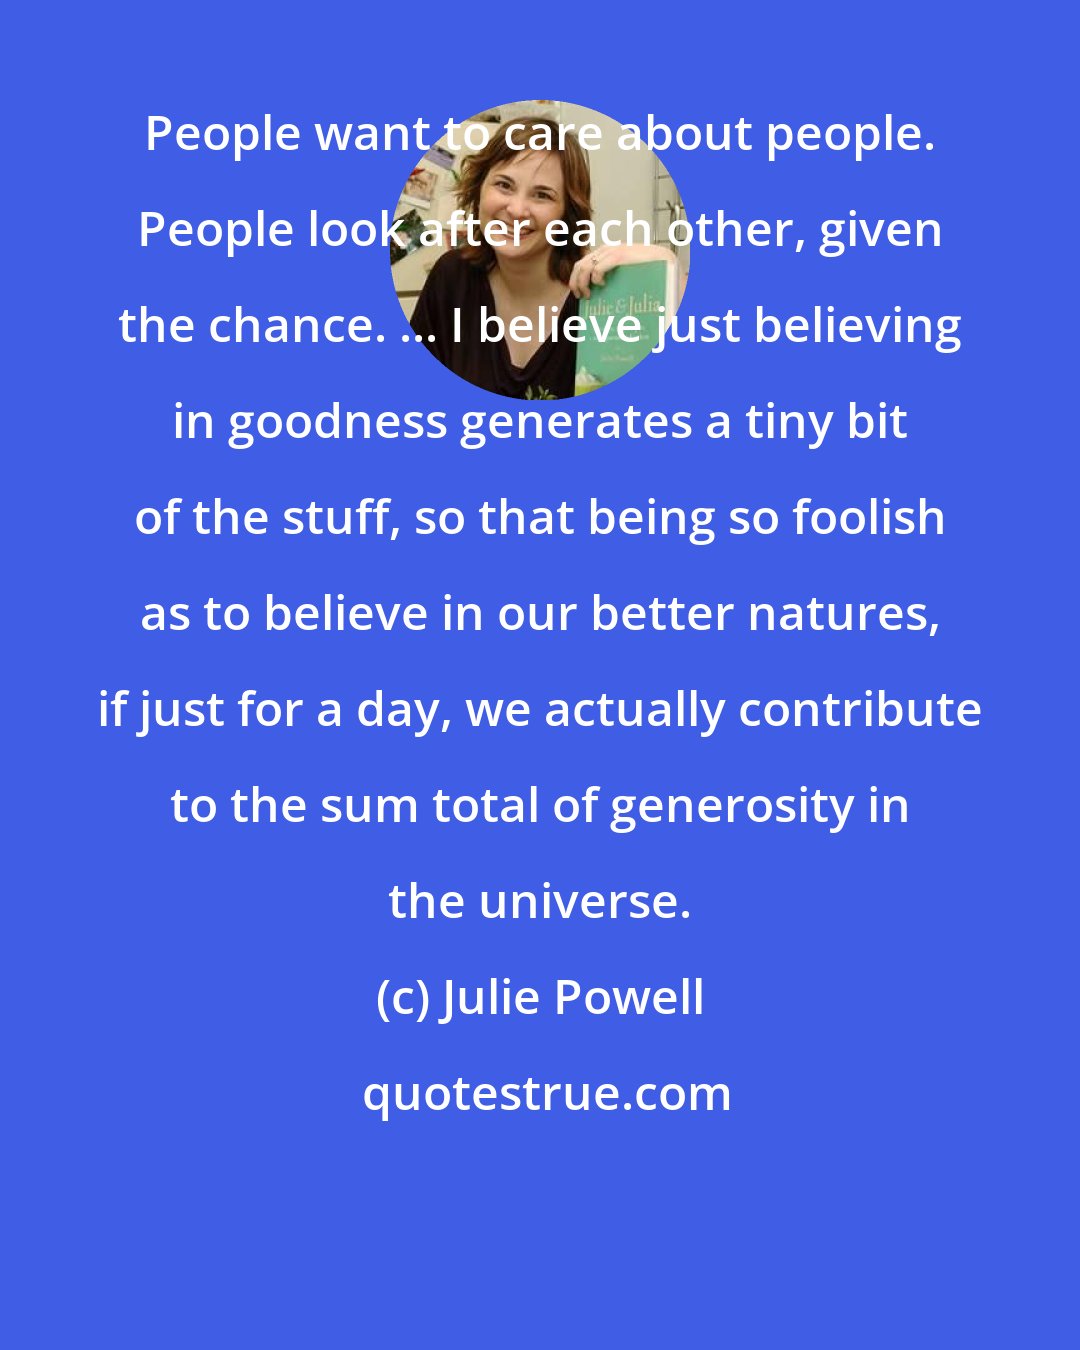 Julie Powell: People want to care about people. People look after each other, given the chance. ... I believe just believing in goodness generates a tiny bit of the stuff, so that being so foolish as to believe in our better natures, if just for a day, we actually contribute to the sum total of generosity in the universe.